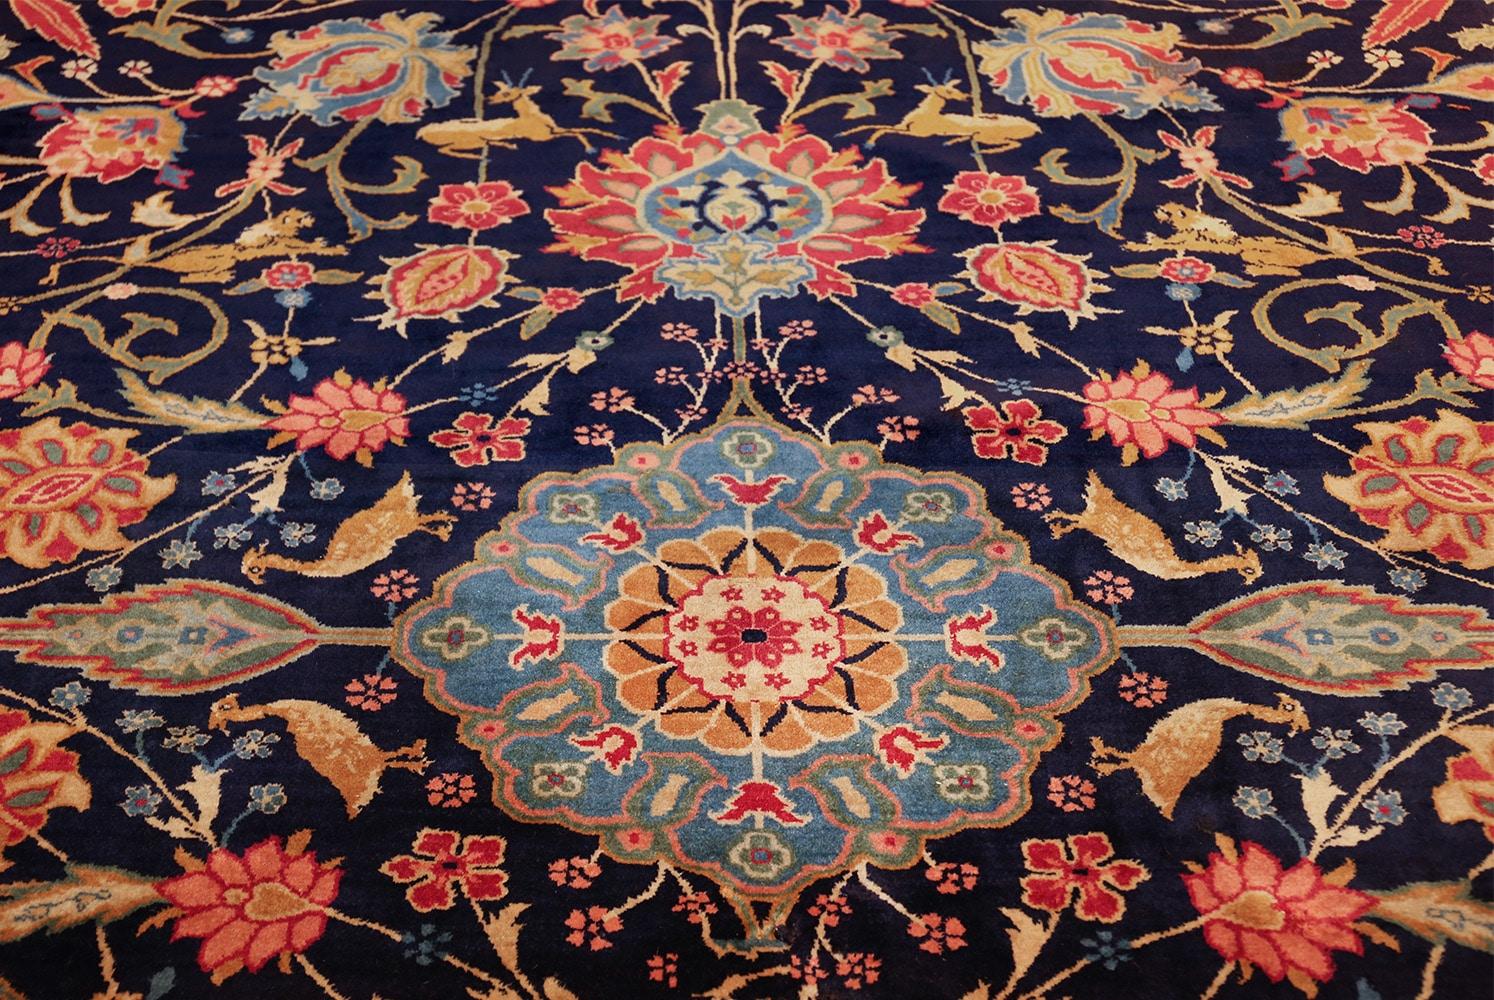 Fine Antique Indian Agra Rug. Size: 7 ft 4 in x 7 ft 11 in (2.24 m x 2.41 m) 5